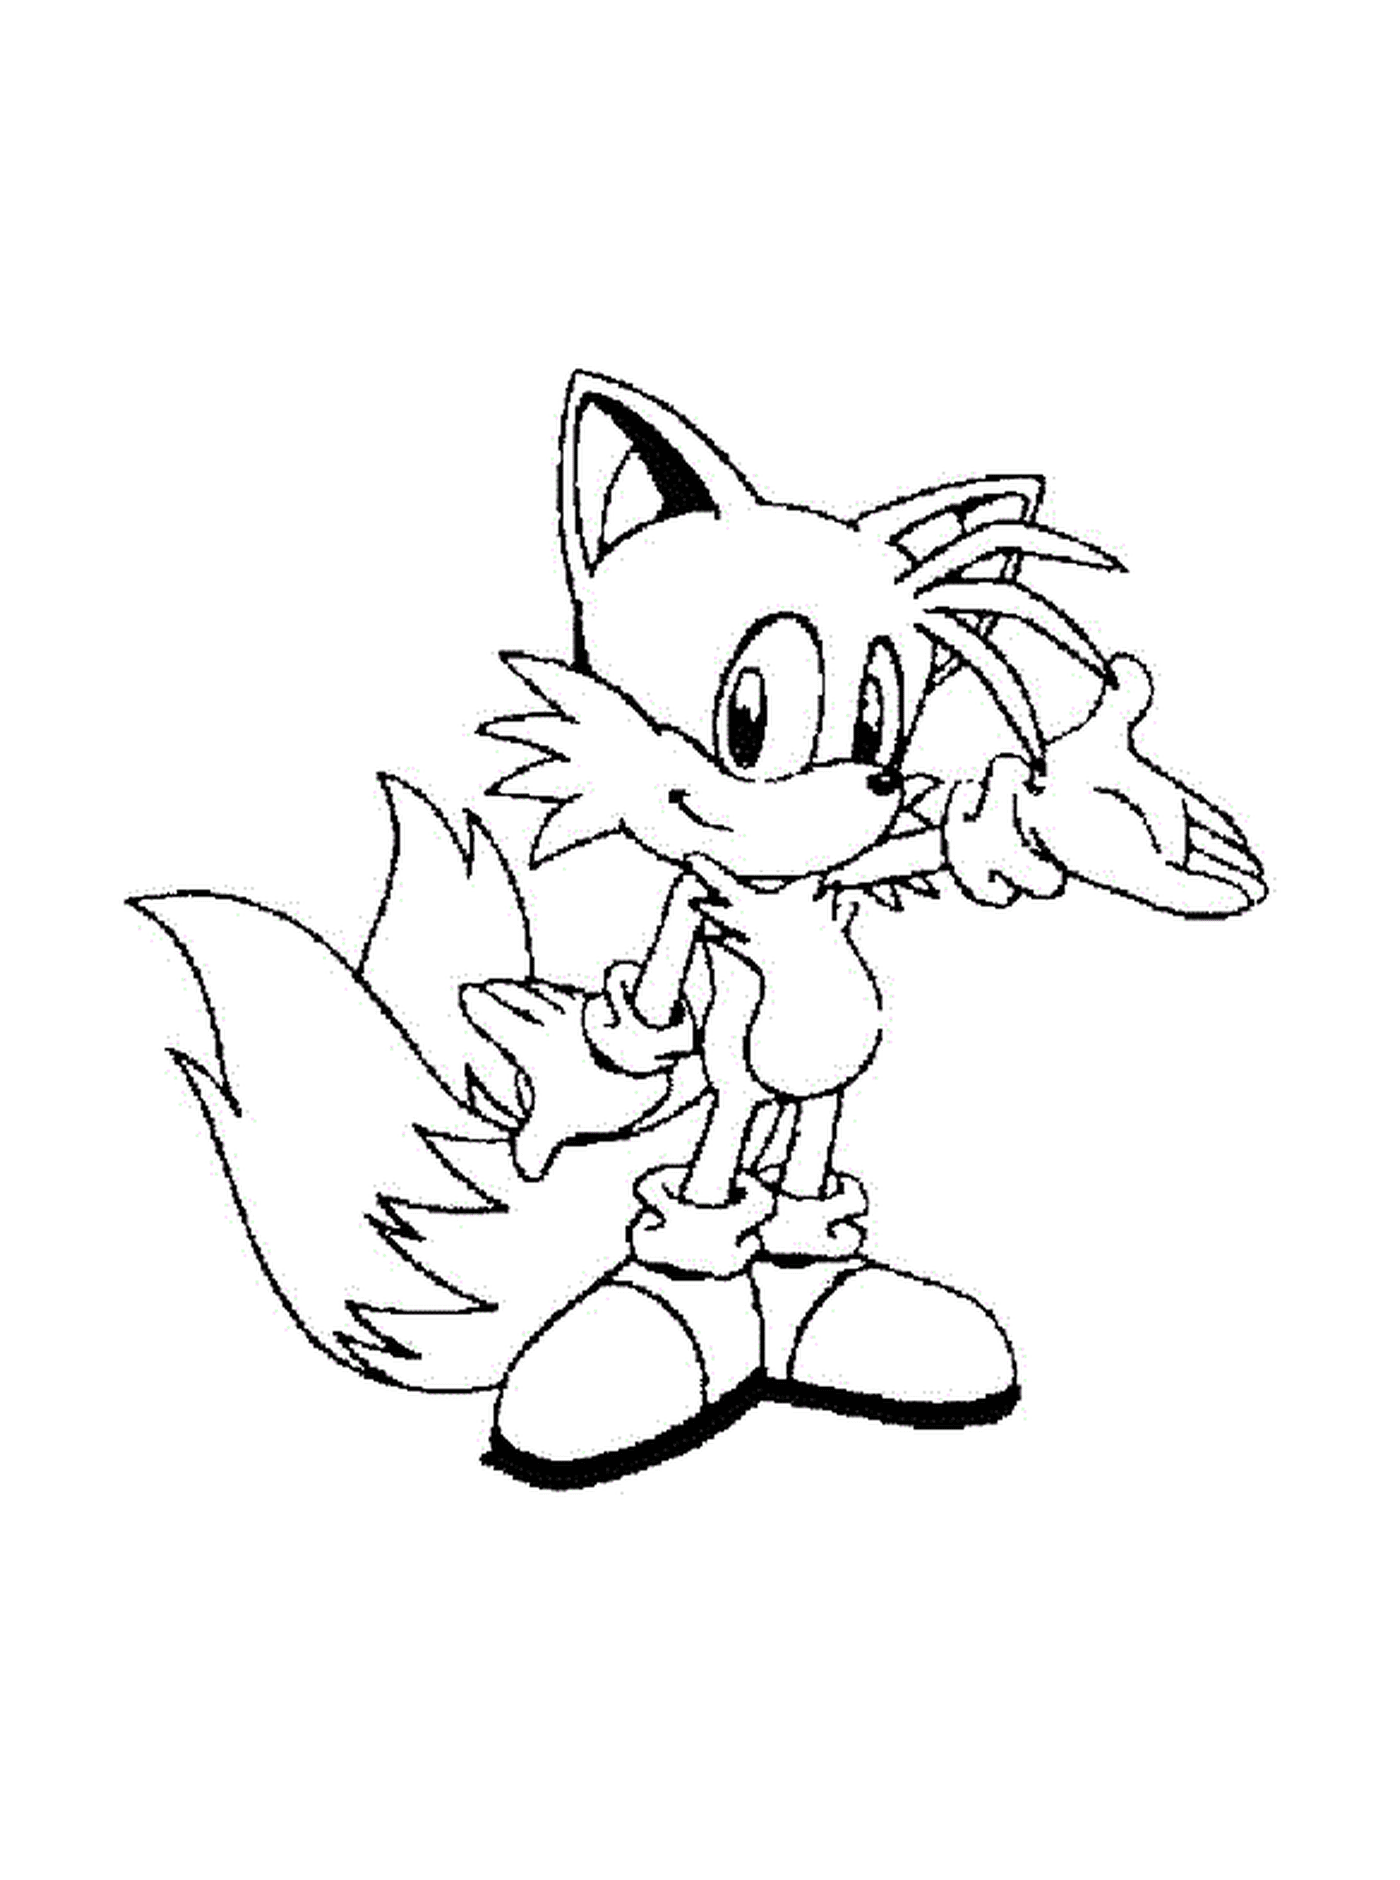  A fox with Sonic 